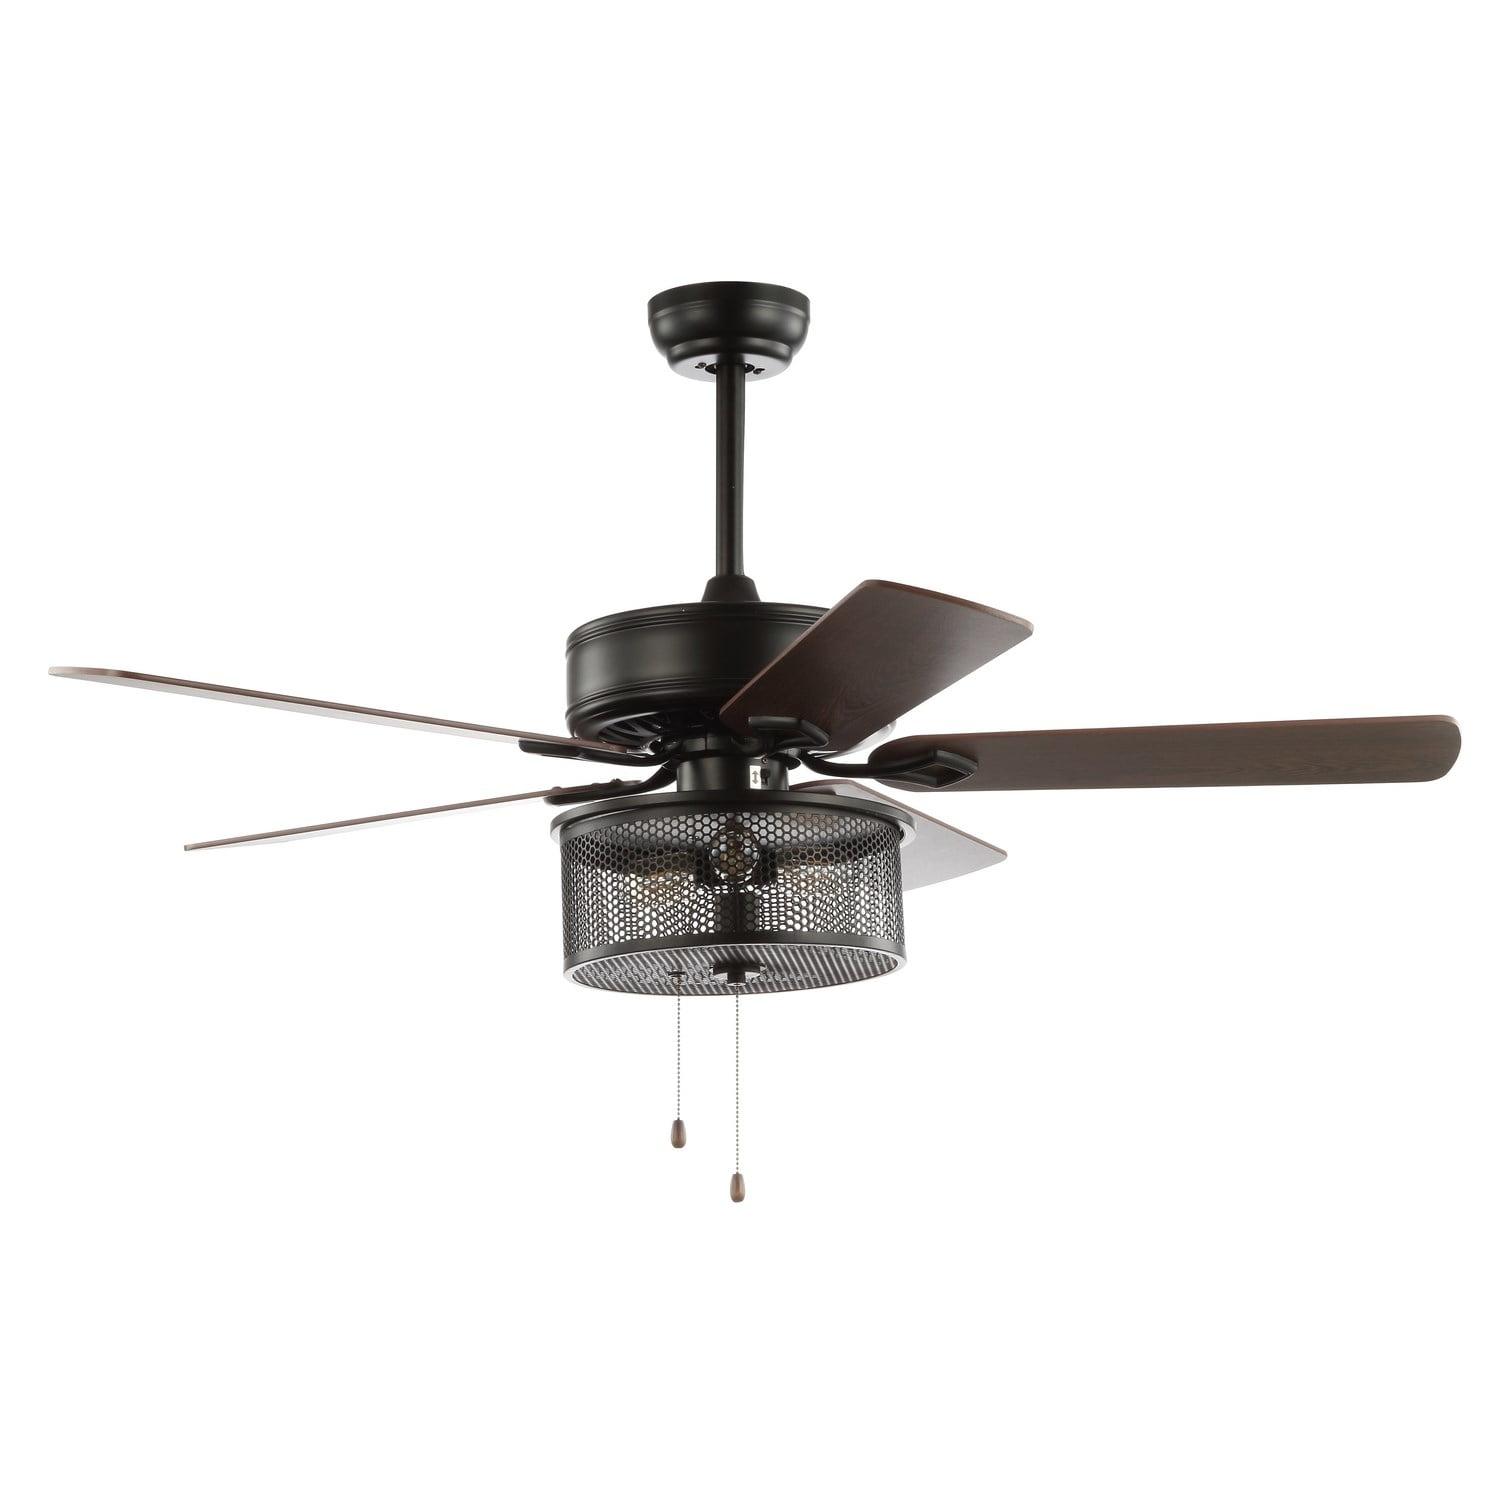 Fredrik 52" Matte Black Ceiling Fan with Lighting and Remote